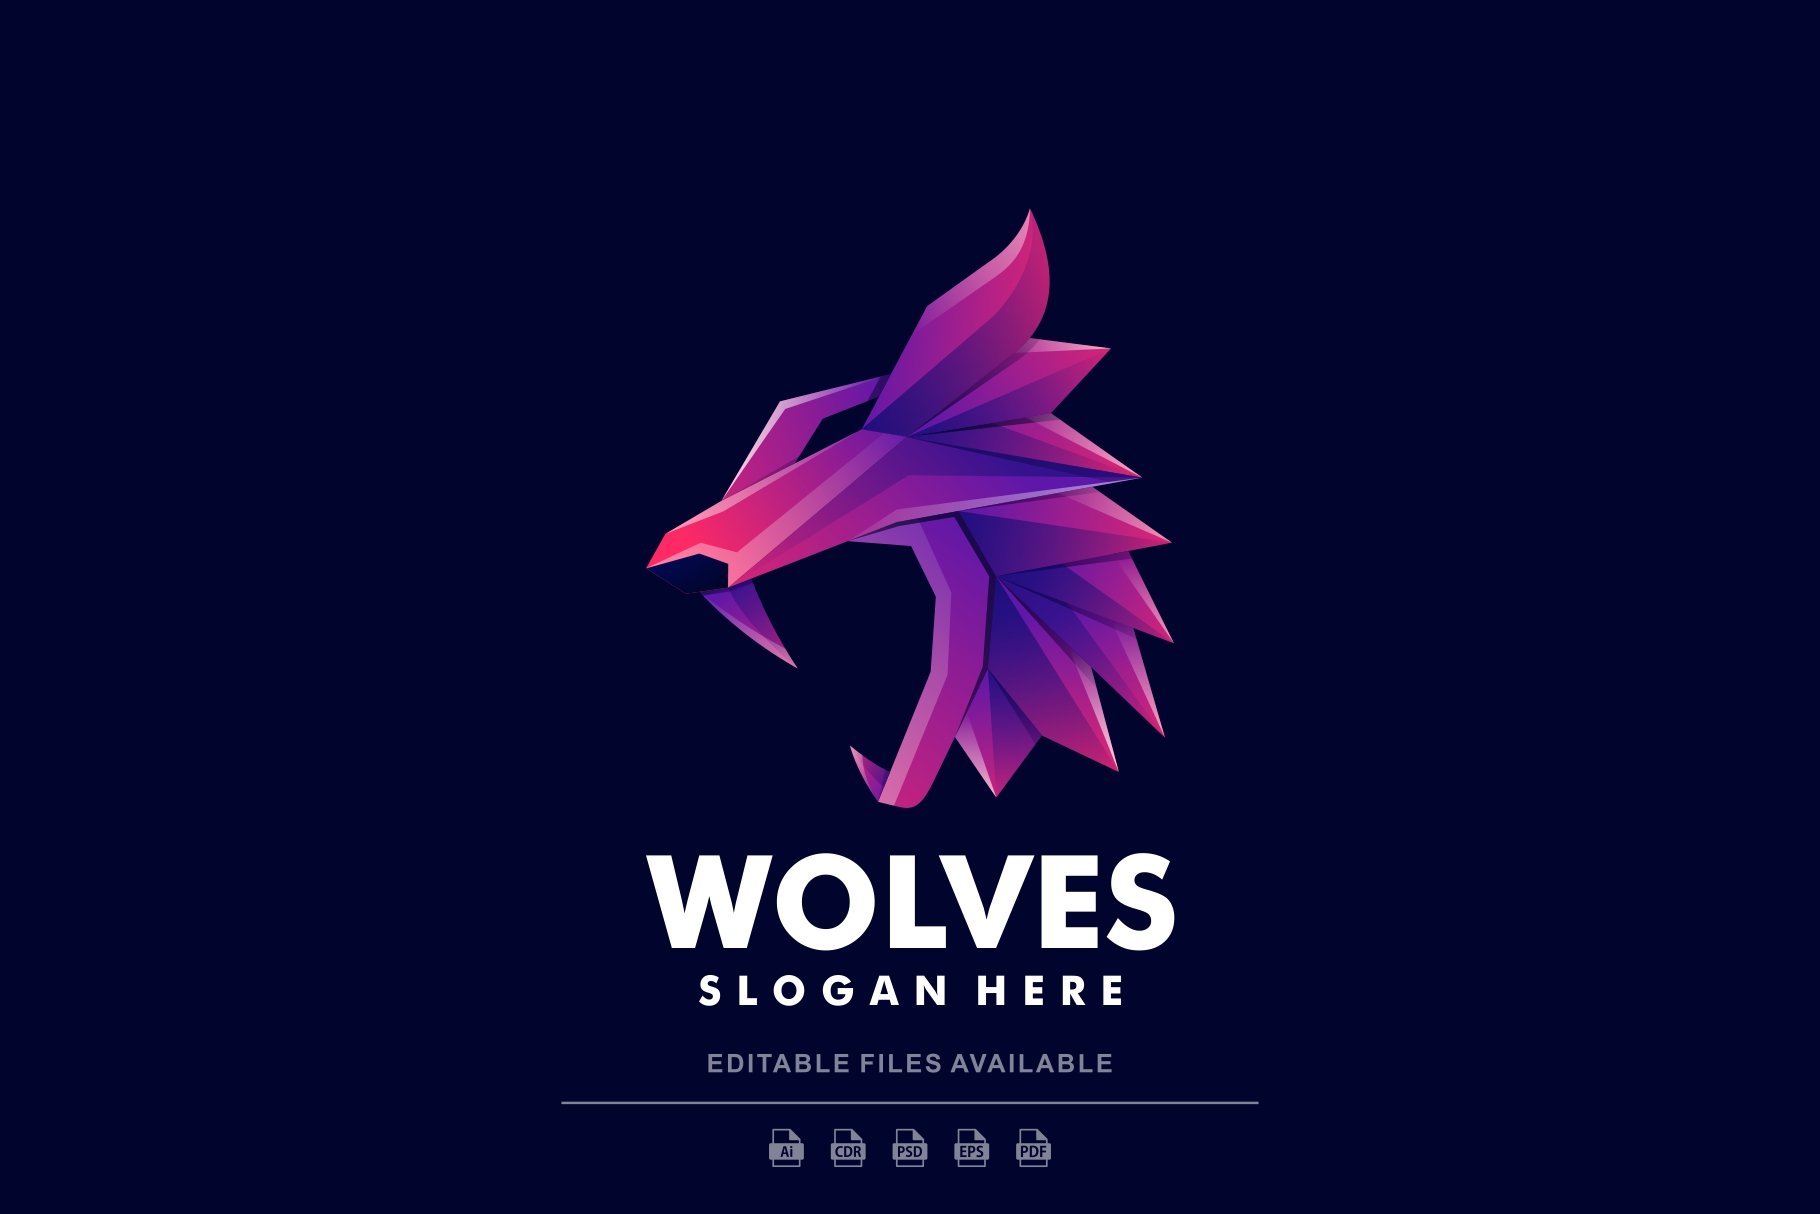 Wolves Colorful Logo cover image.